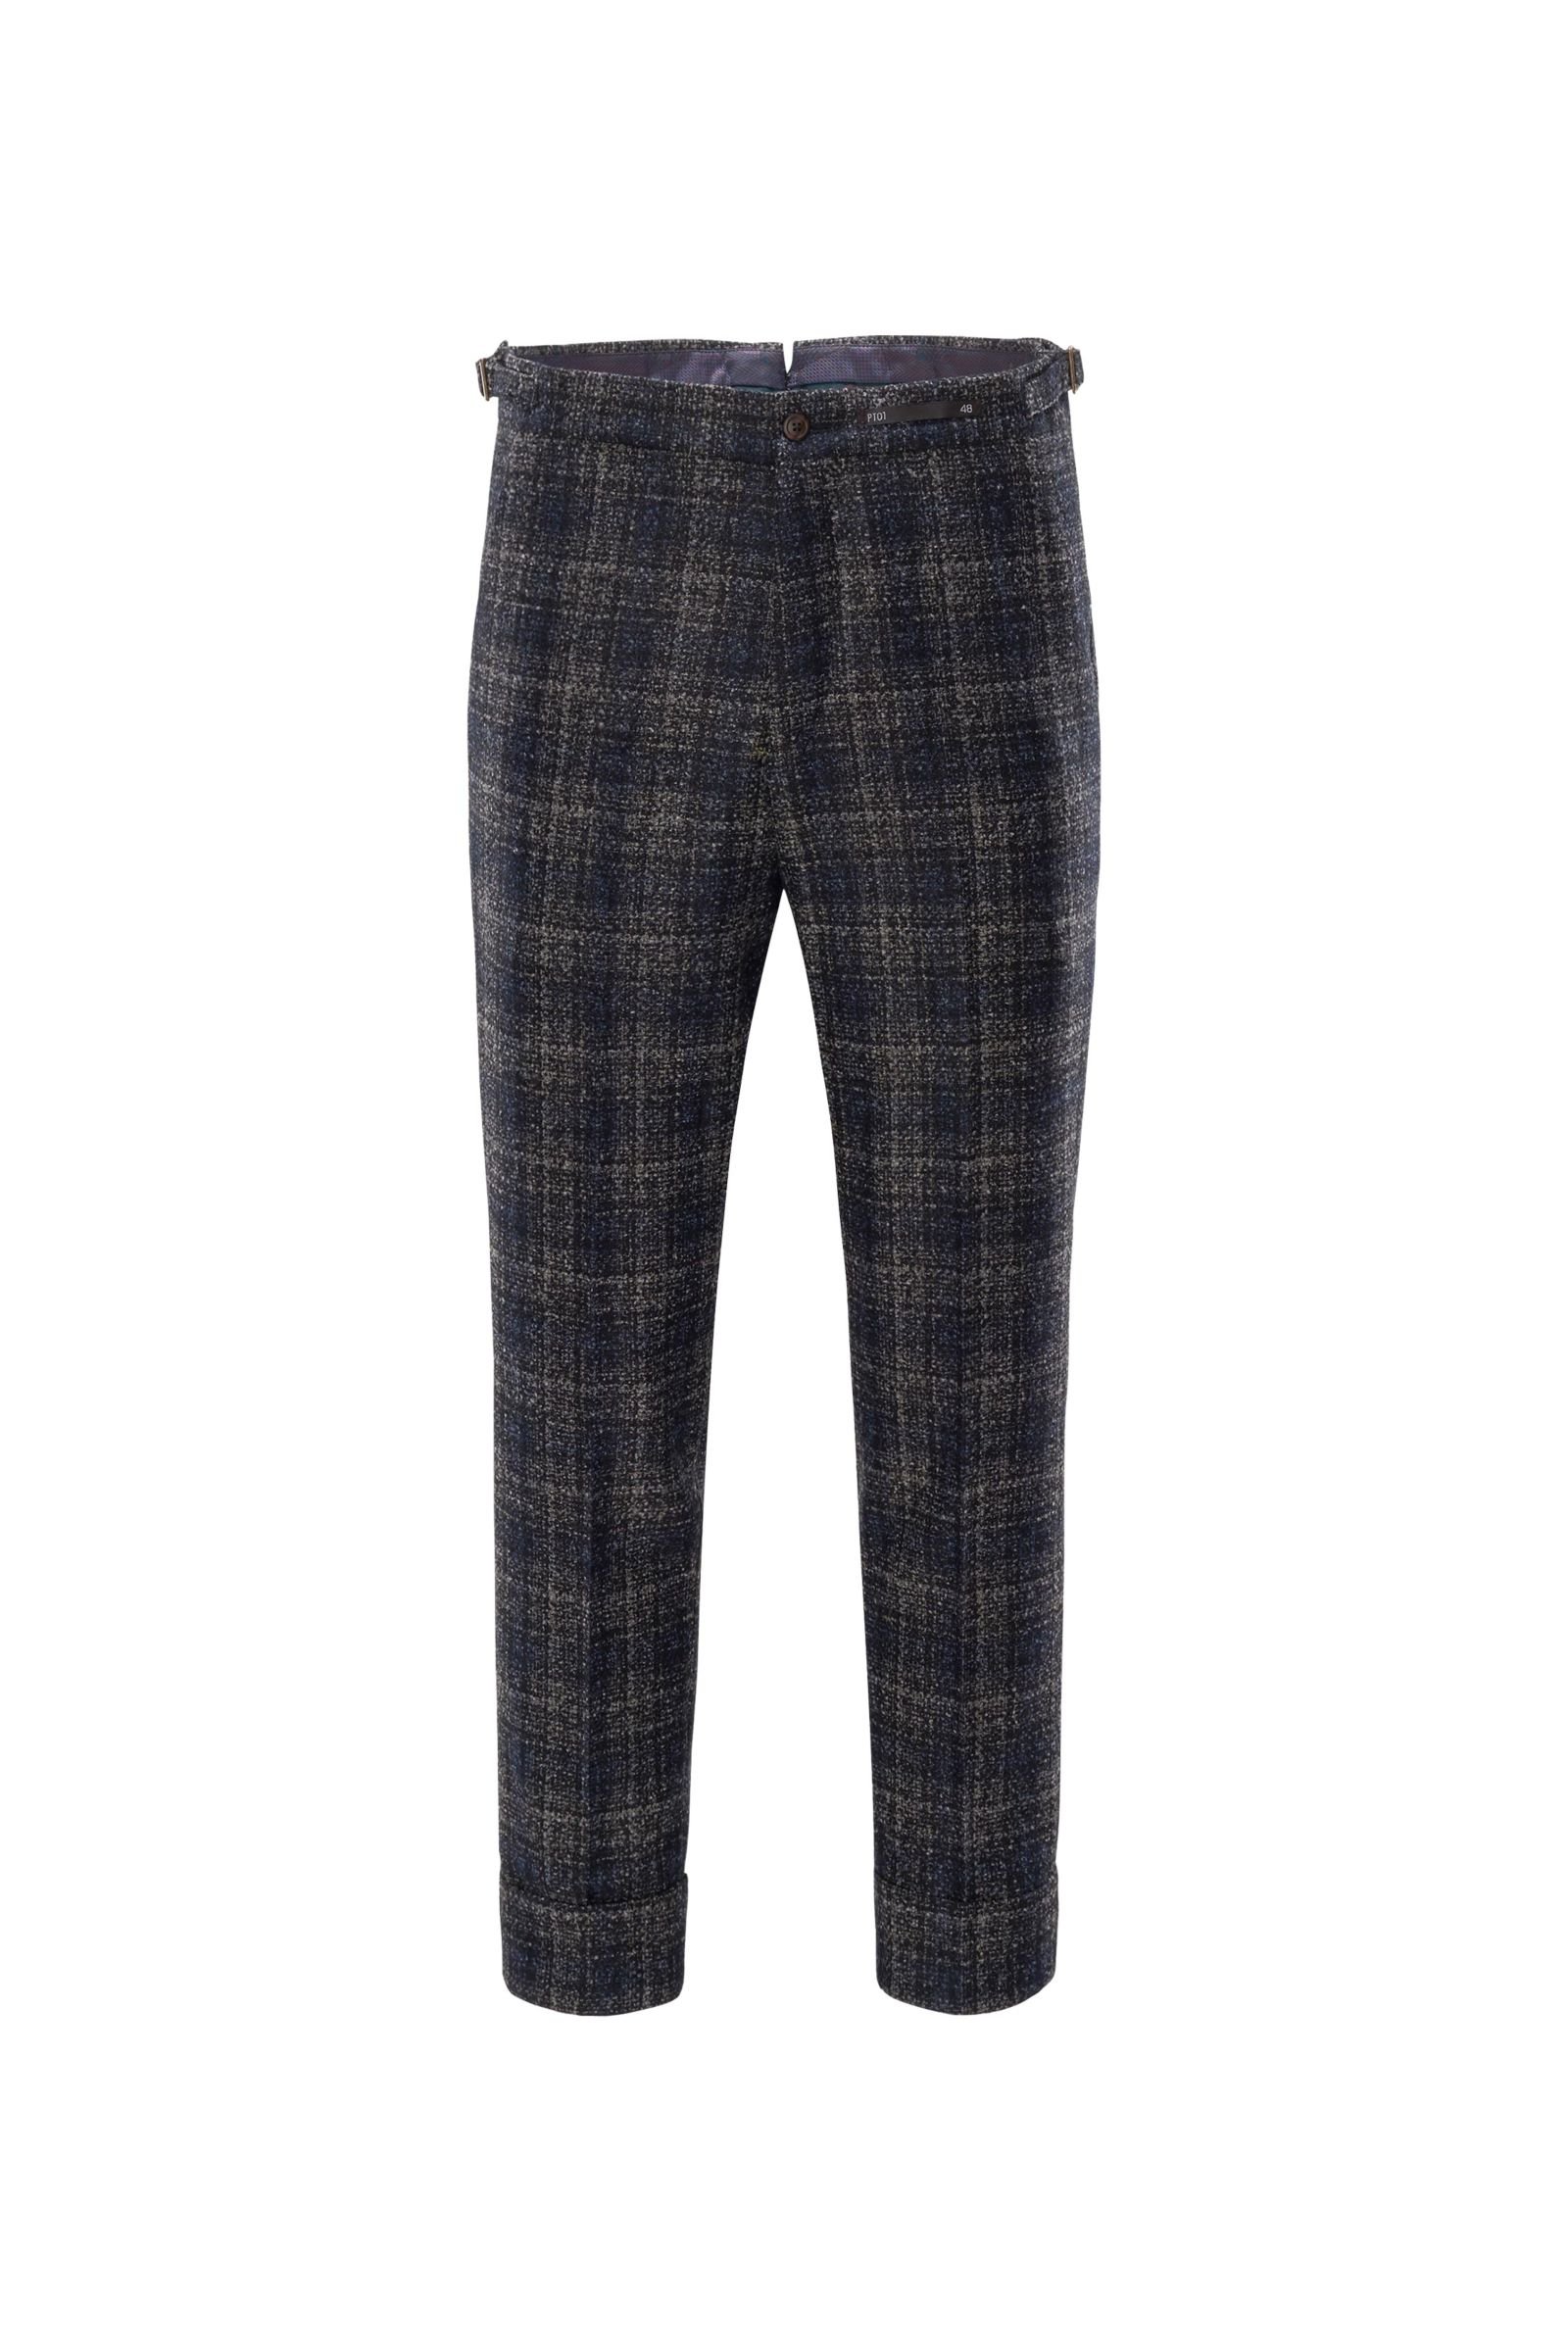 Wool trousers 'Preppy Fit' navy/grey checked